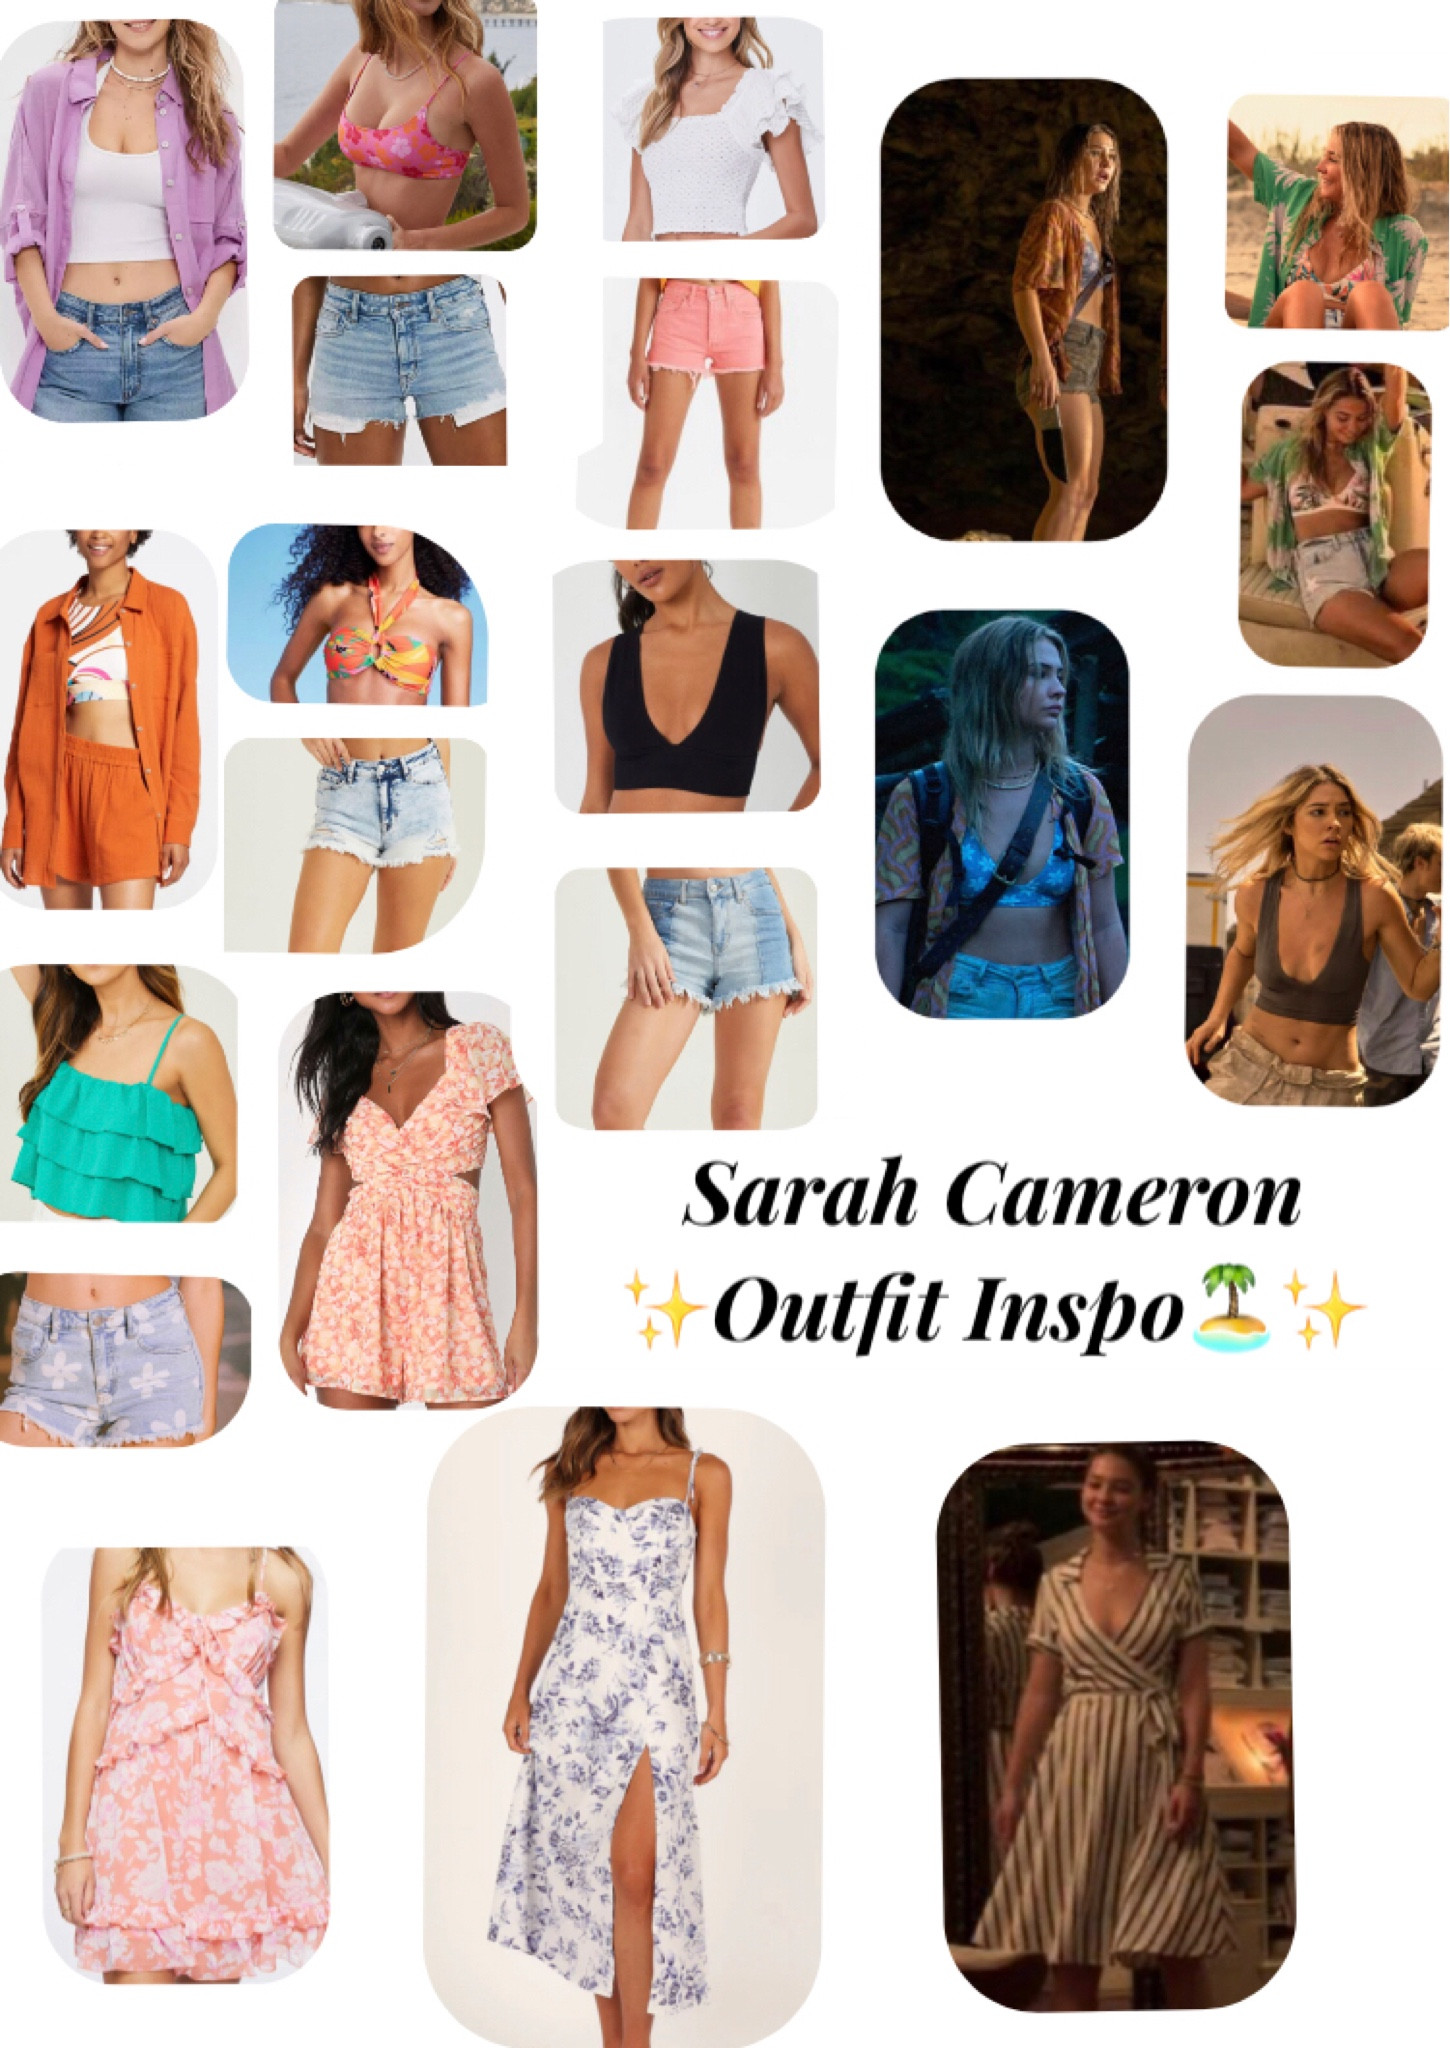 Lucky Brand Printed Lace-Trim Tank Top worn by Sarah Cameron